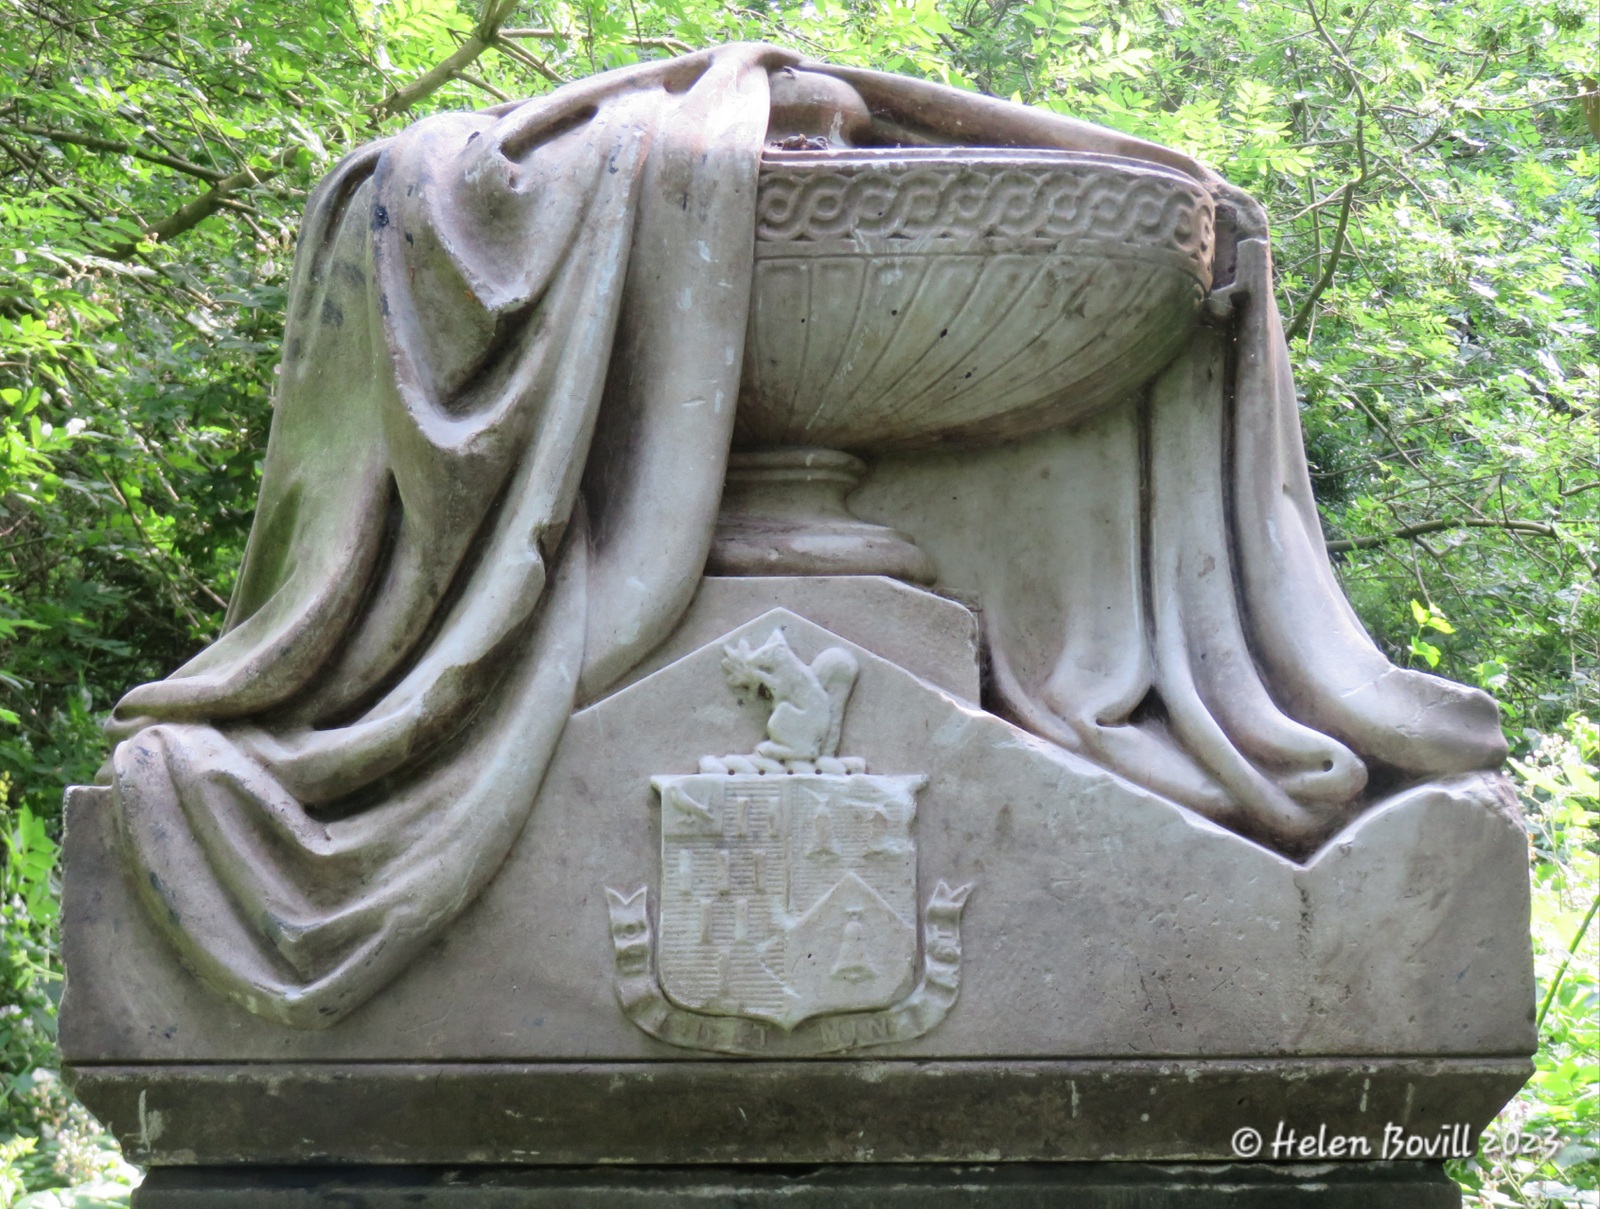 The Blundell monument with a Squirrel forming part of the engraved detail